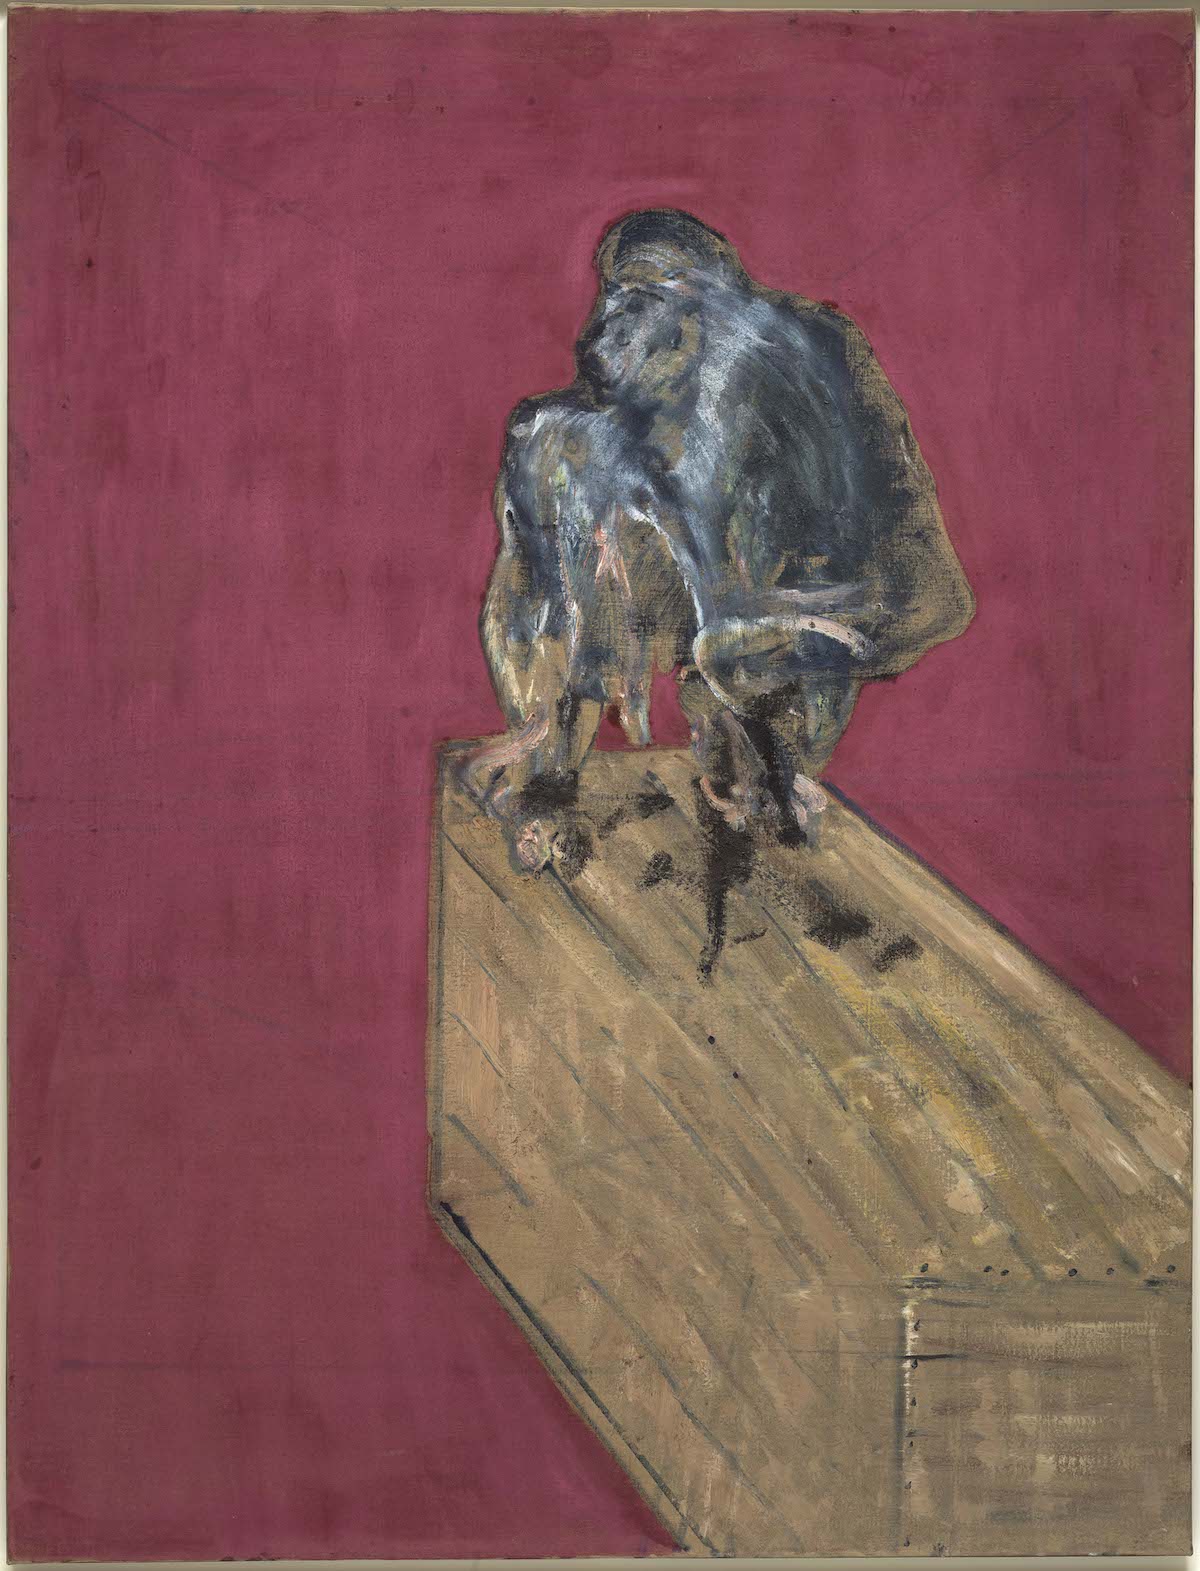 The Wick - Francis Bacon, Study for Chimpanzee, 1957
Oil and pastel on canvas, 152.4 x 117 cm
Peggy Guggenheim Collection, Venice 
Solomon R. Guggenheim Foundation, New York
Photo: David Heald (NYC)
© The Estate of Francis Bacon. All rights reserved. DACS 2021 